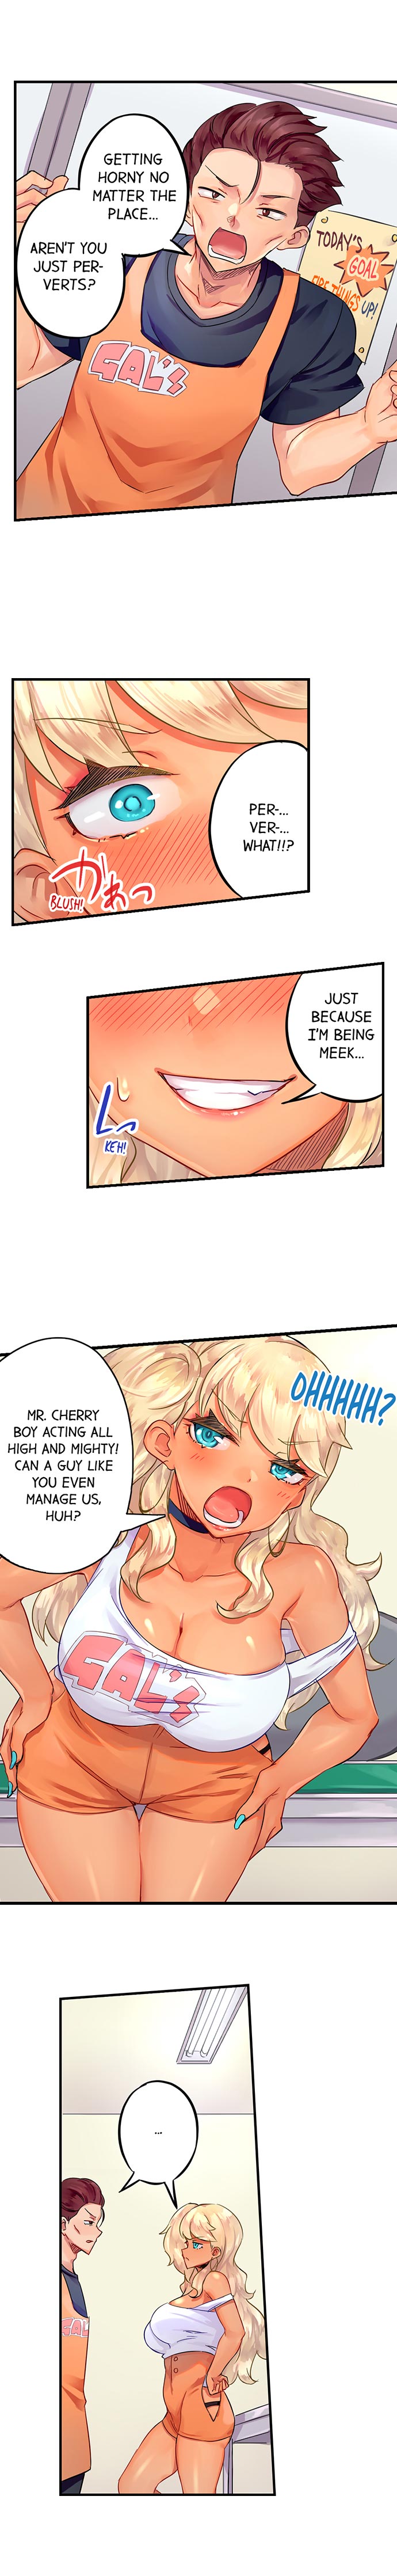 Orgasm Management for This Tanned Girl - Chapter 2 Page 3